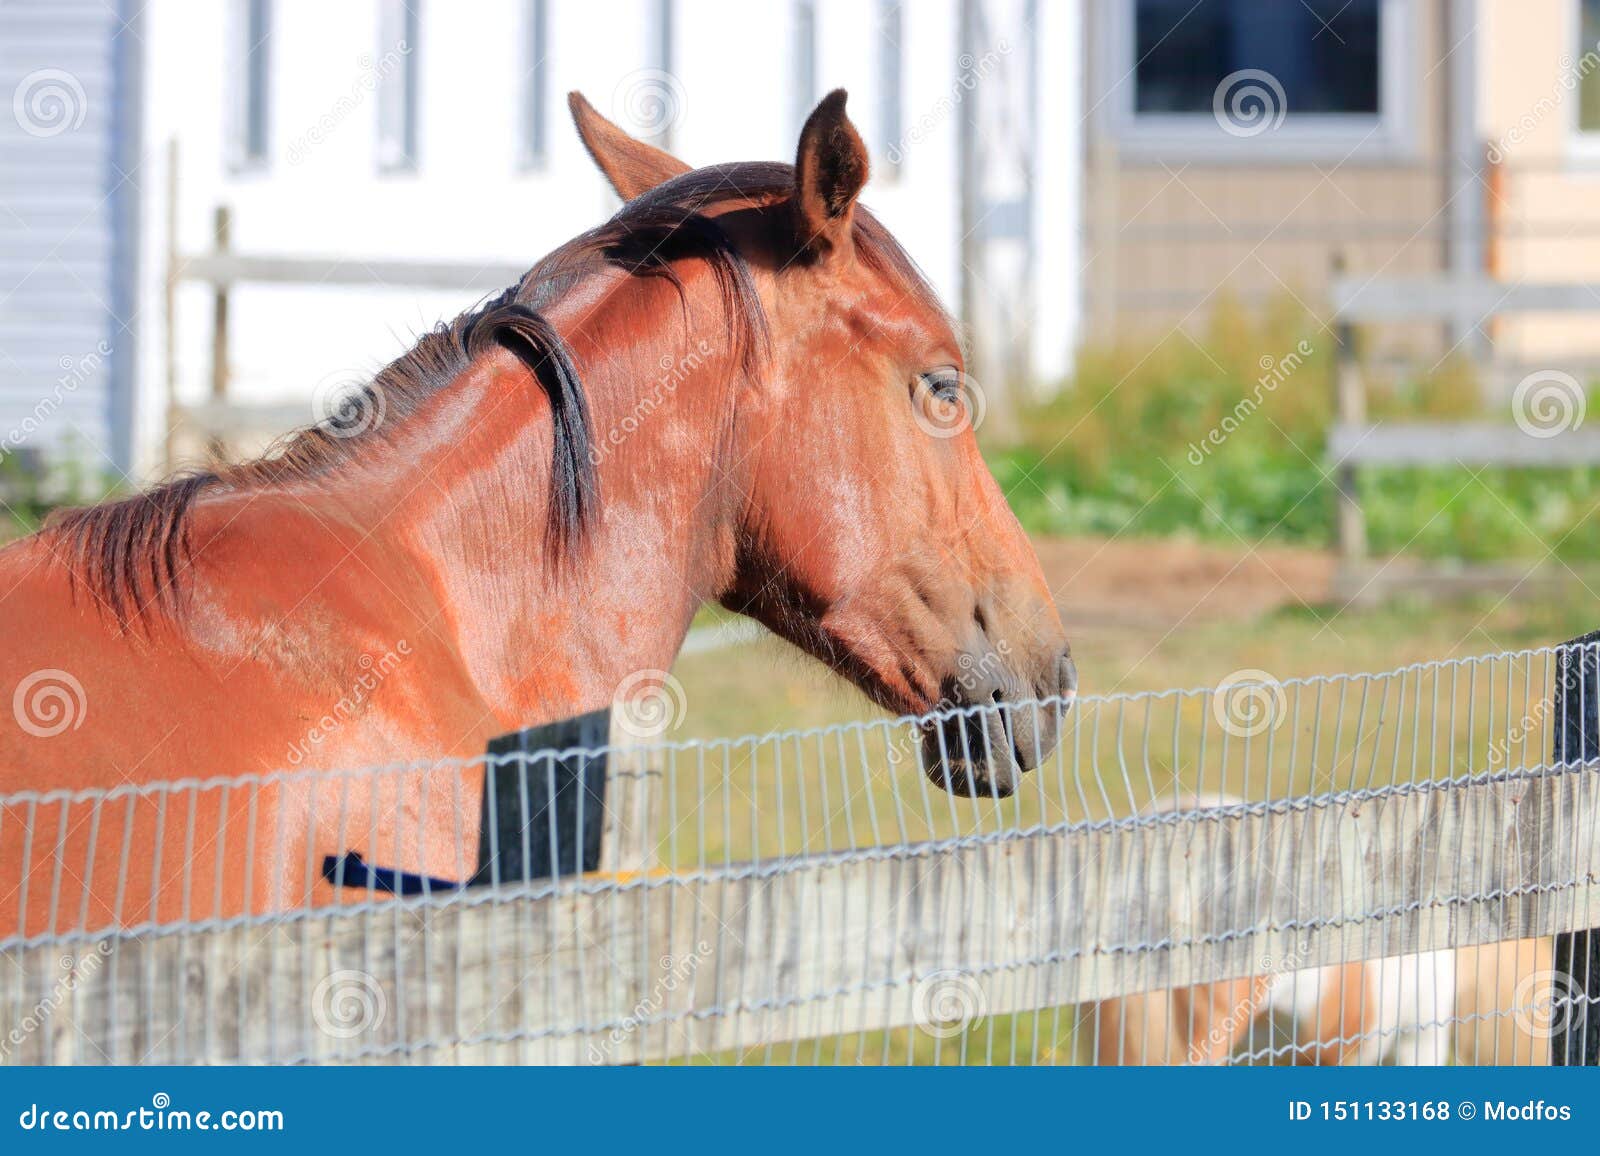 991 Hackney Horse Photos Free Royalty Free Stock Photos From Dreamstime